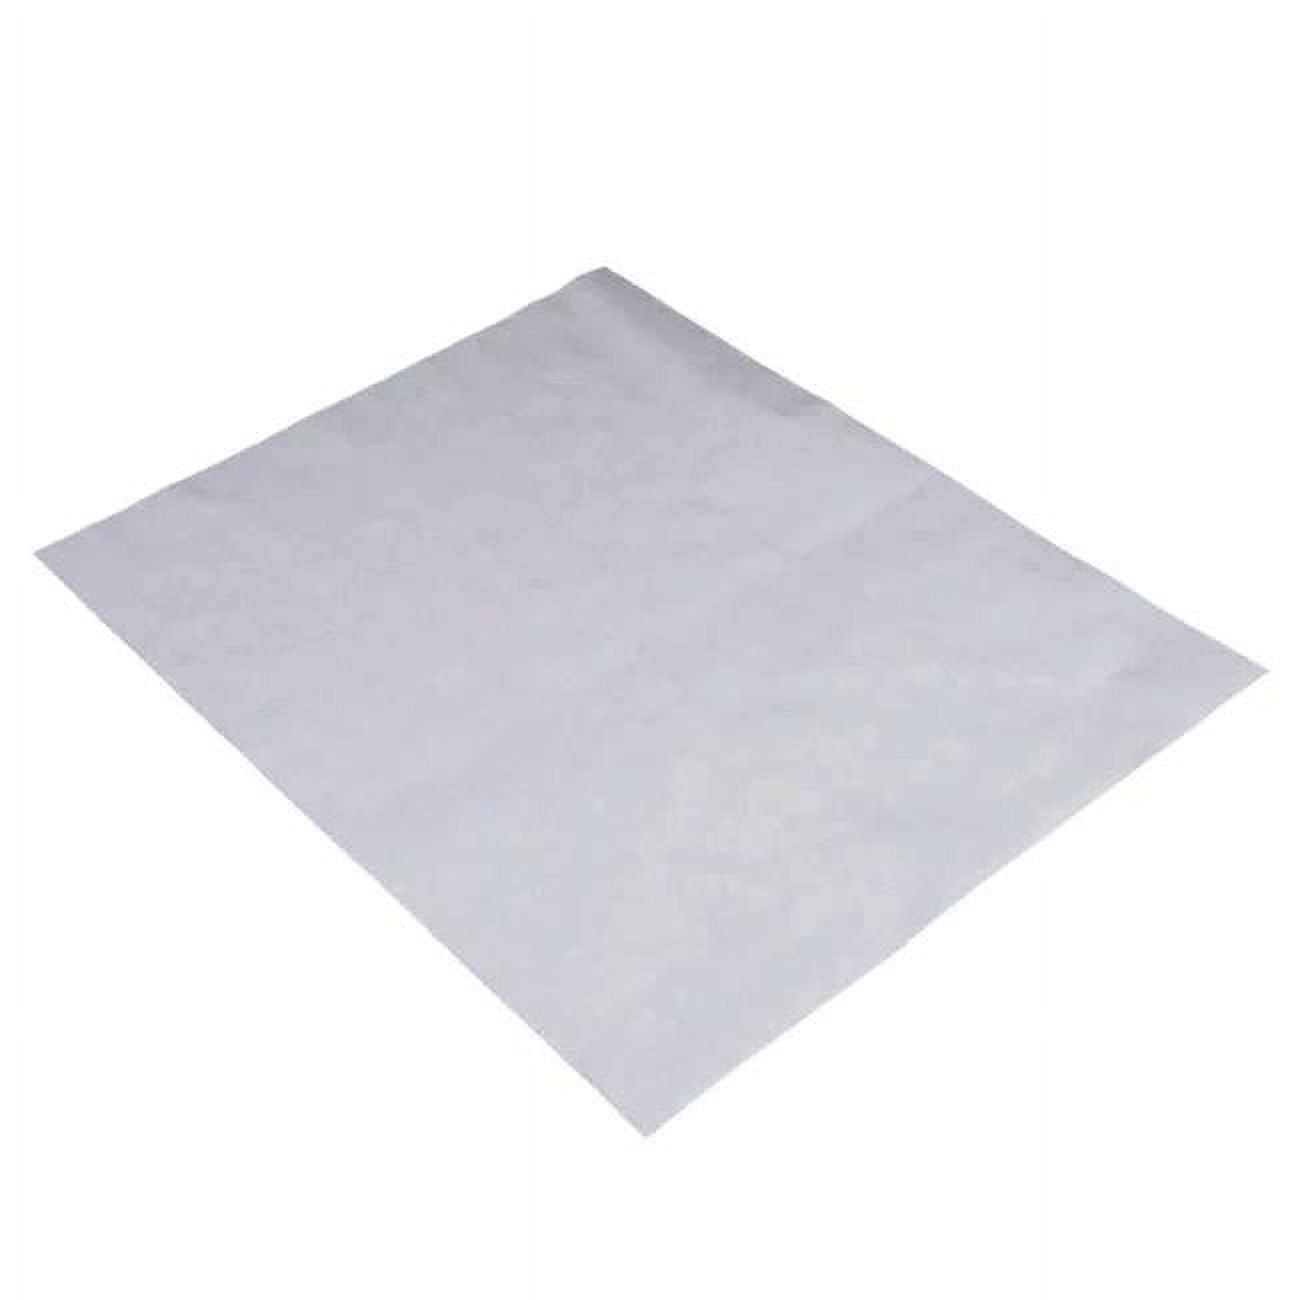 5122017 Pe 12 X 15 In. Wet Wax Sheets, Pack Of 1